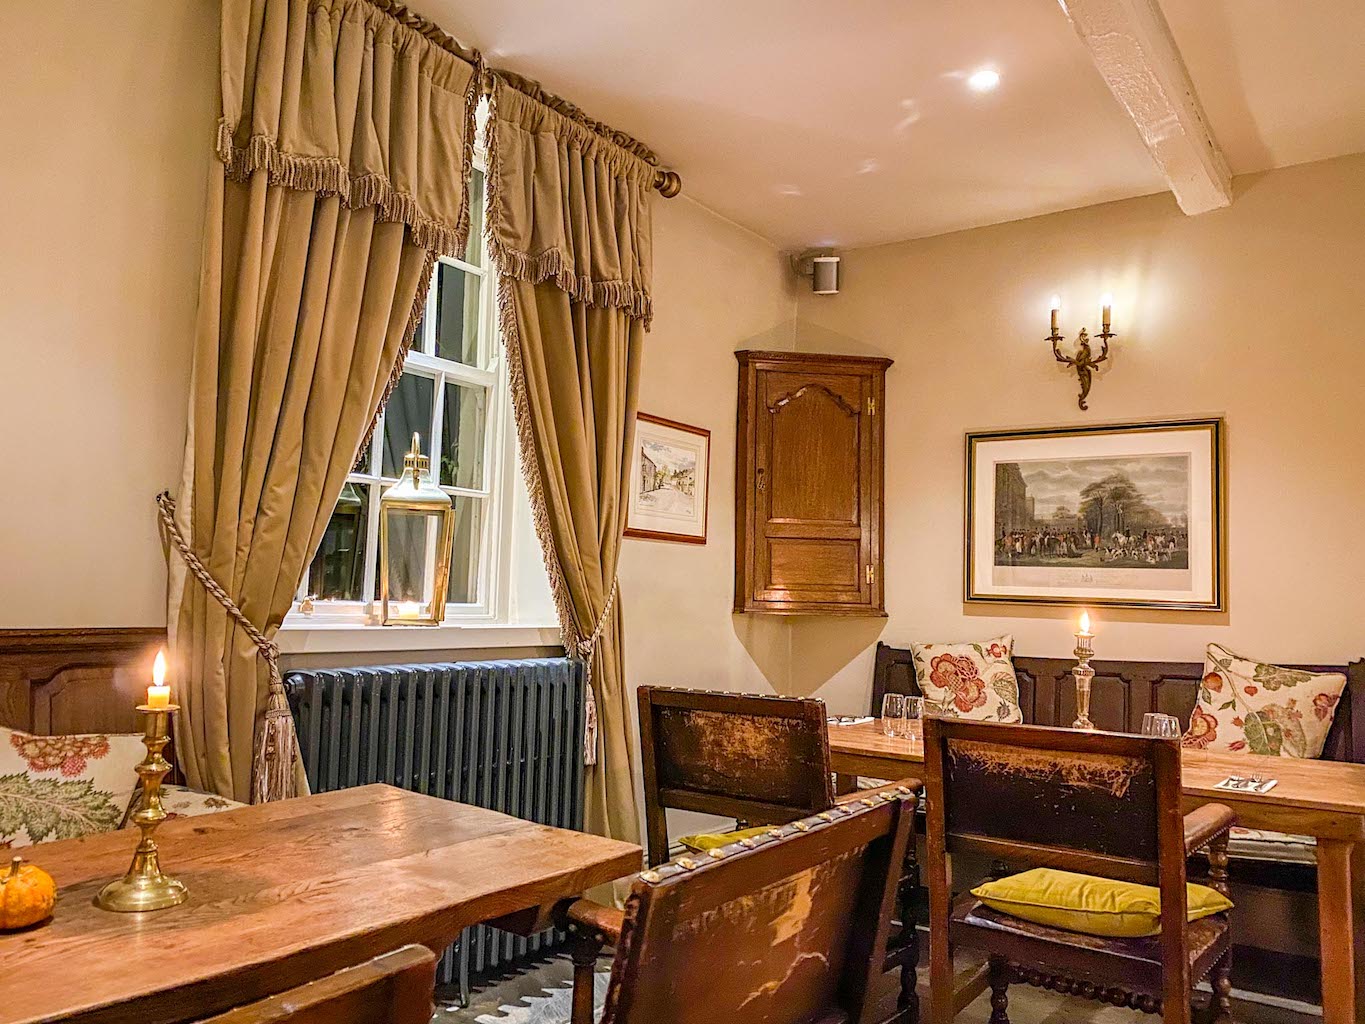 The Coach and Horses Ribble Valley Restaurant